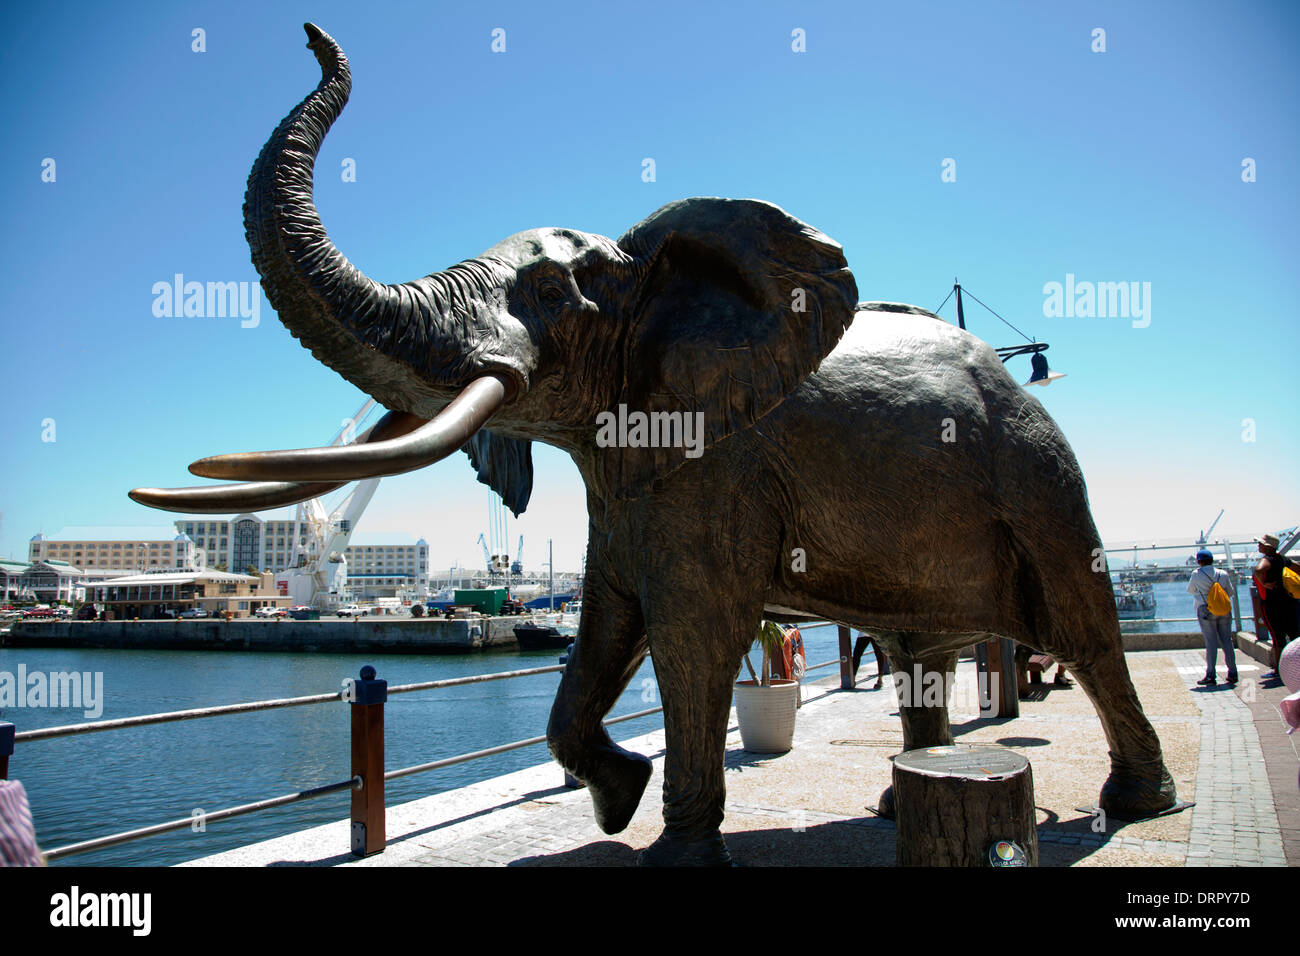 Large Elephant Sculpture for Out of Africa Childrens Foundation at V&A Waterfront in cape Town - South Africa Stock Photo